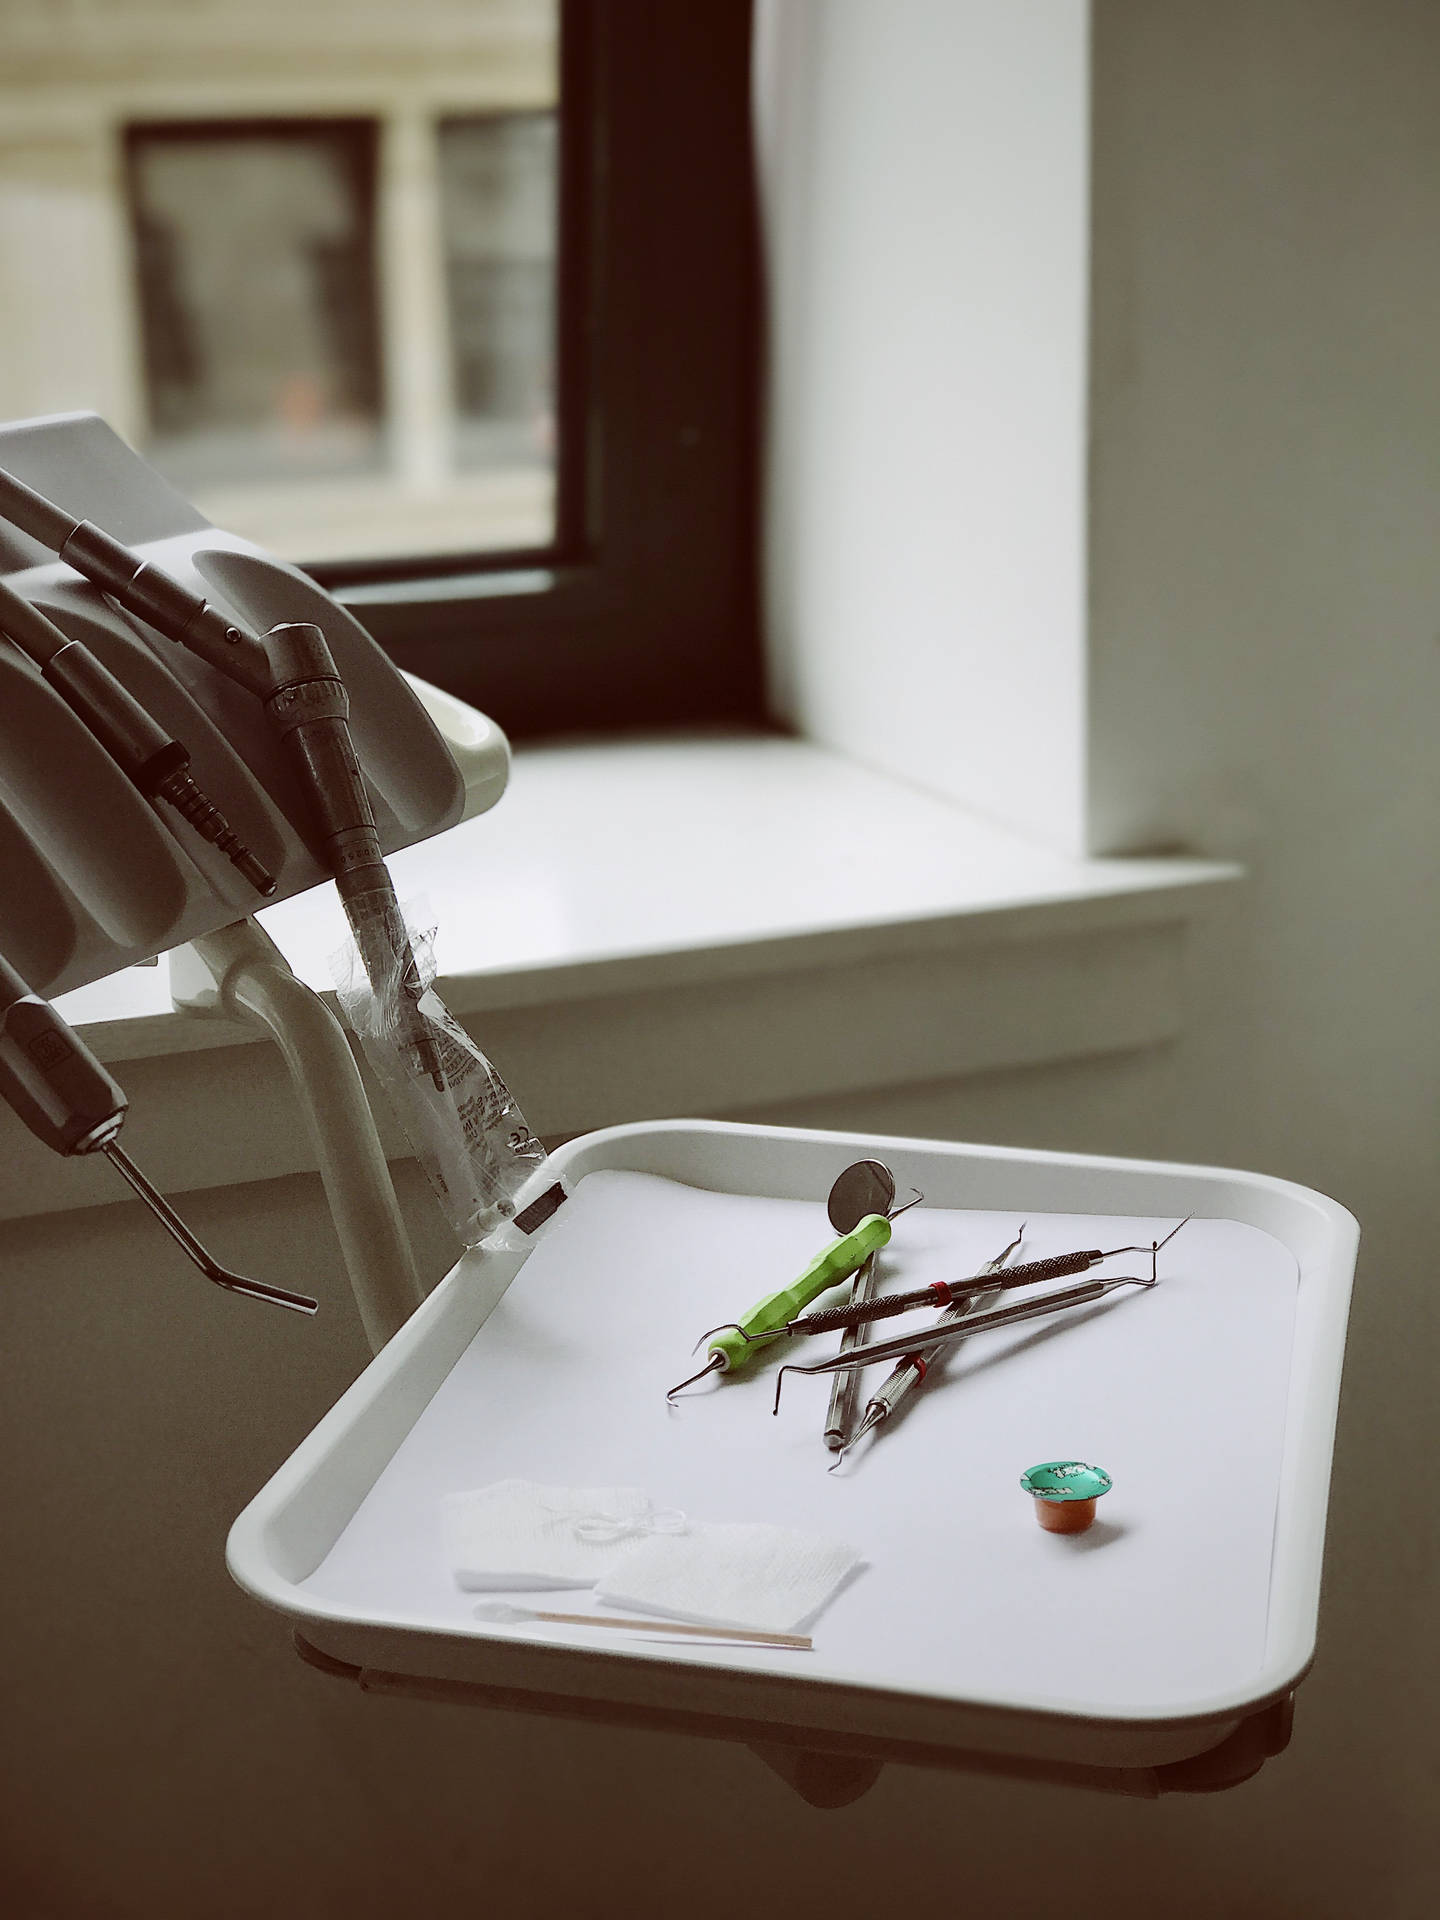 Dentistry Tools By A Window Background